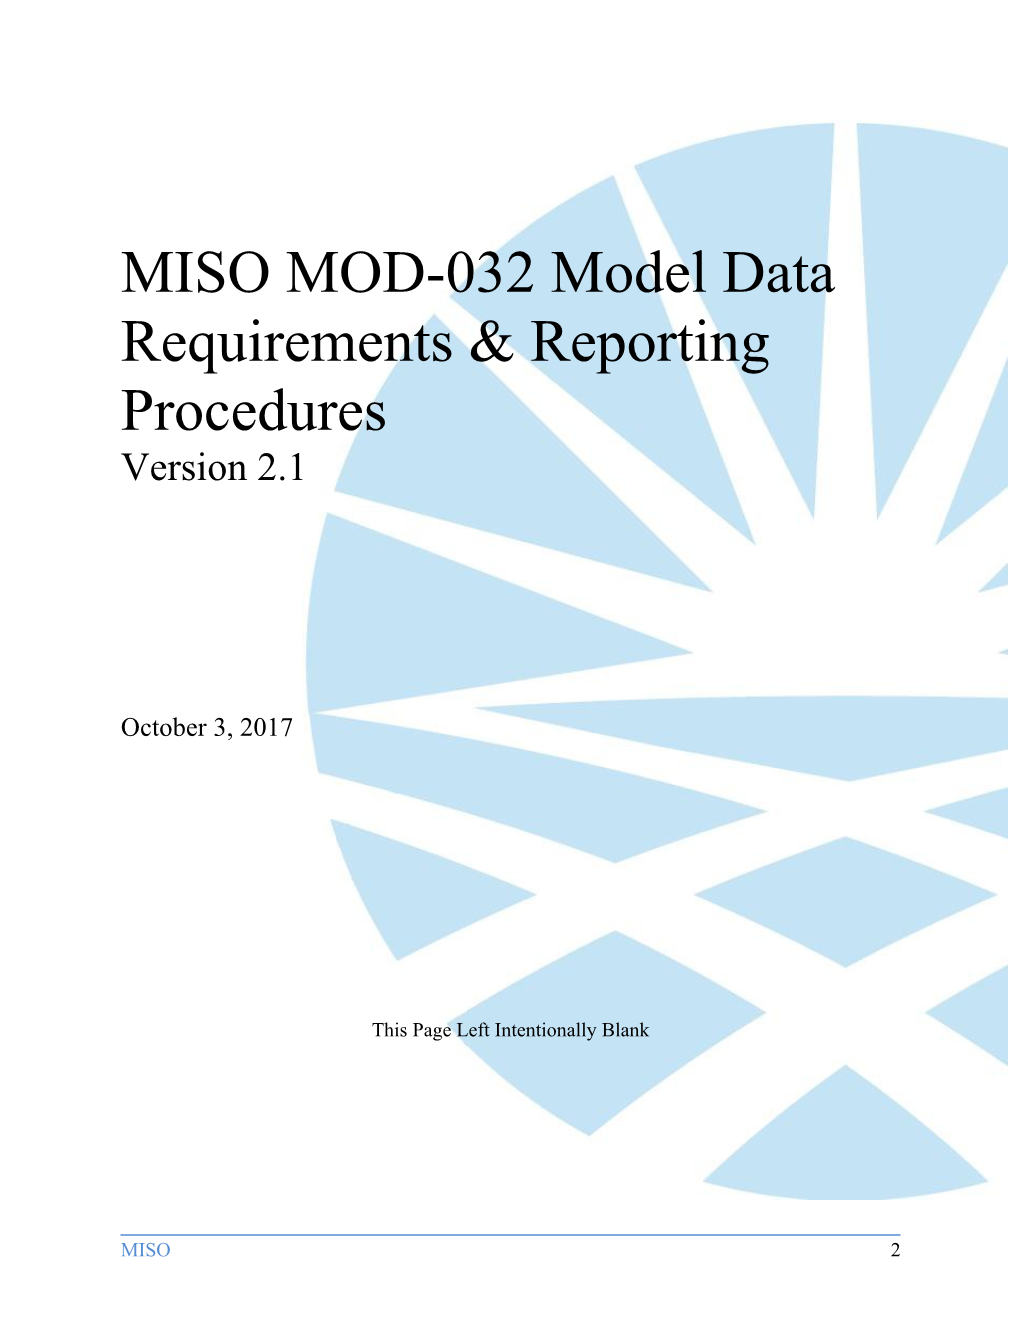 MOD-032 Model Data Requirements and Reporting Procedures